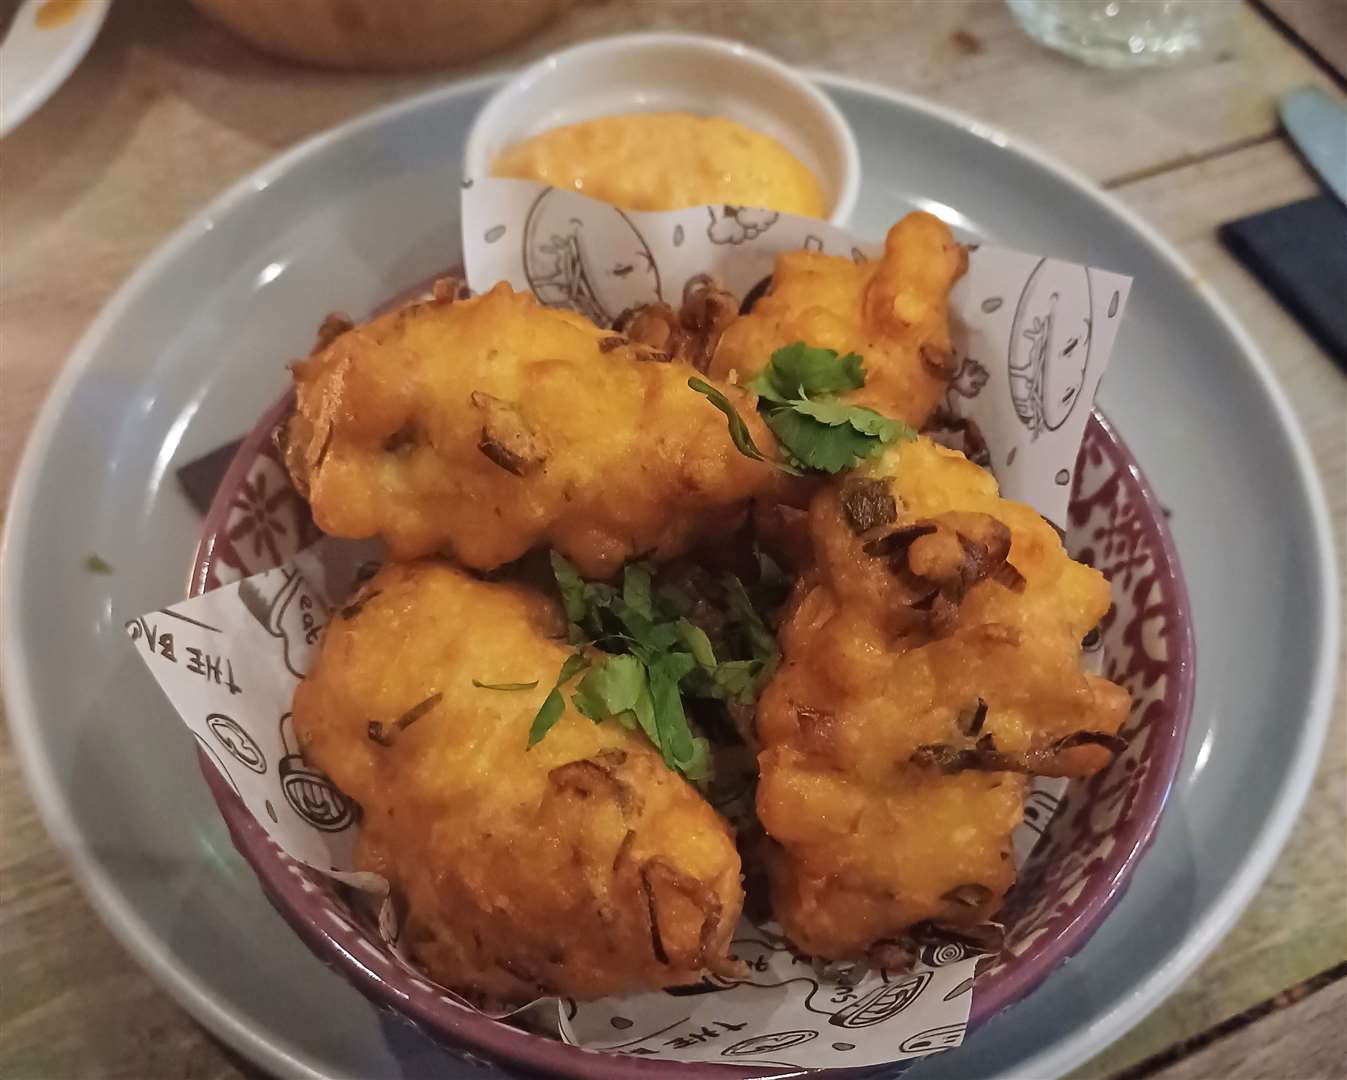 The Bao Baron's sweetcorn and lime leaf fritters had a nice pop when you took a bite